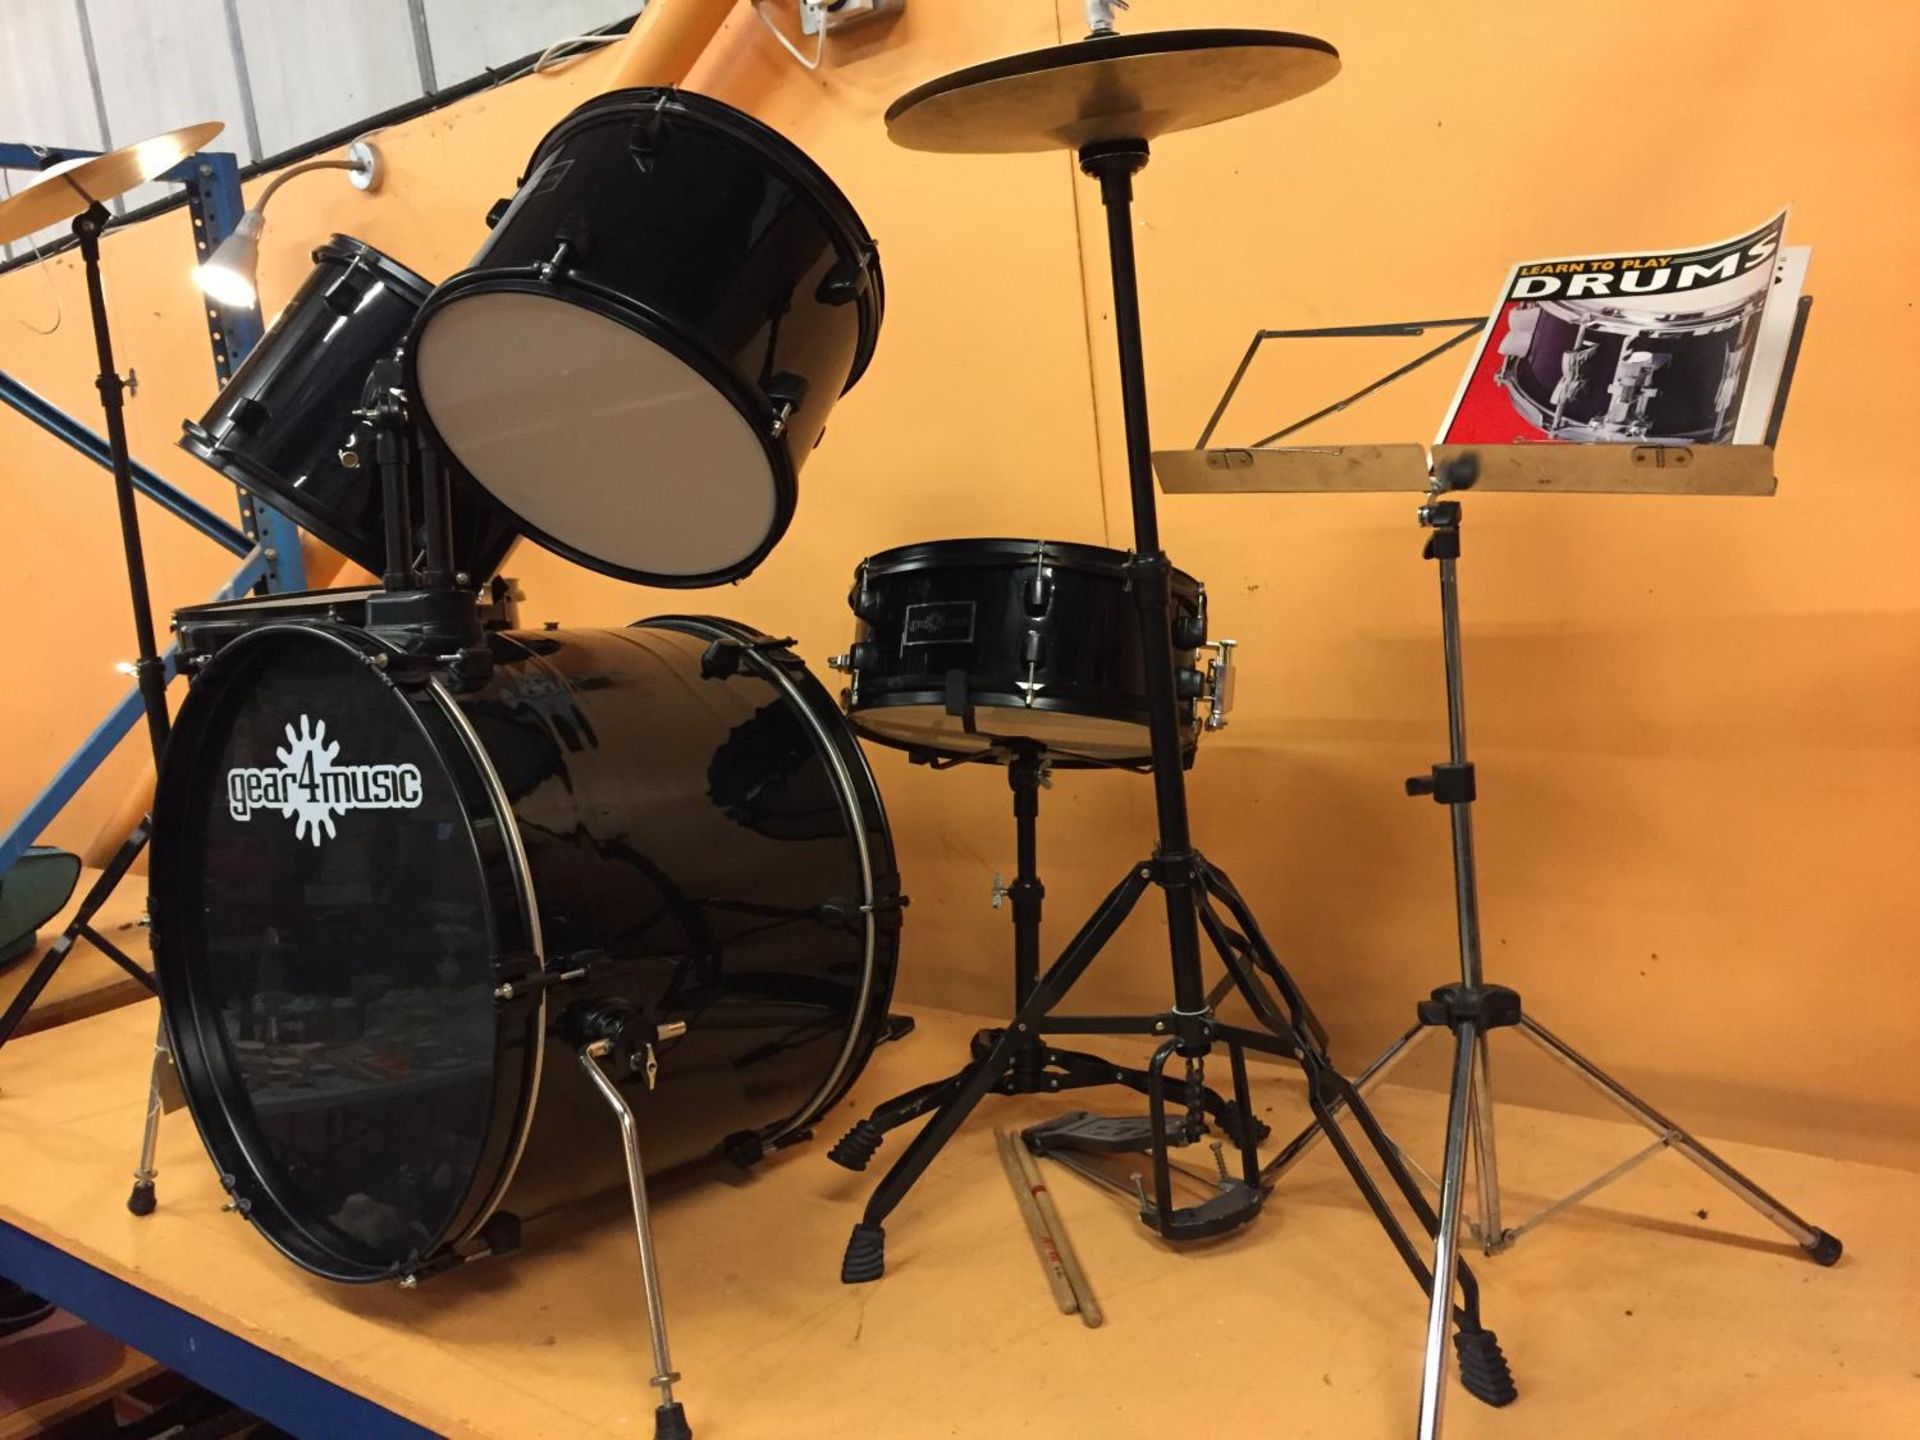 A BLACK GEAR FOR MUSIC DRUM KIT WITH MUSIC AND MUSIC STAND - Image 3 of 6